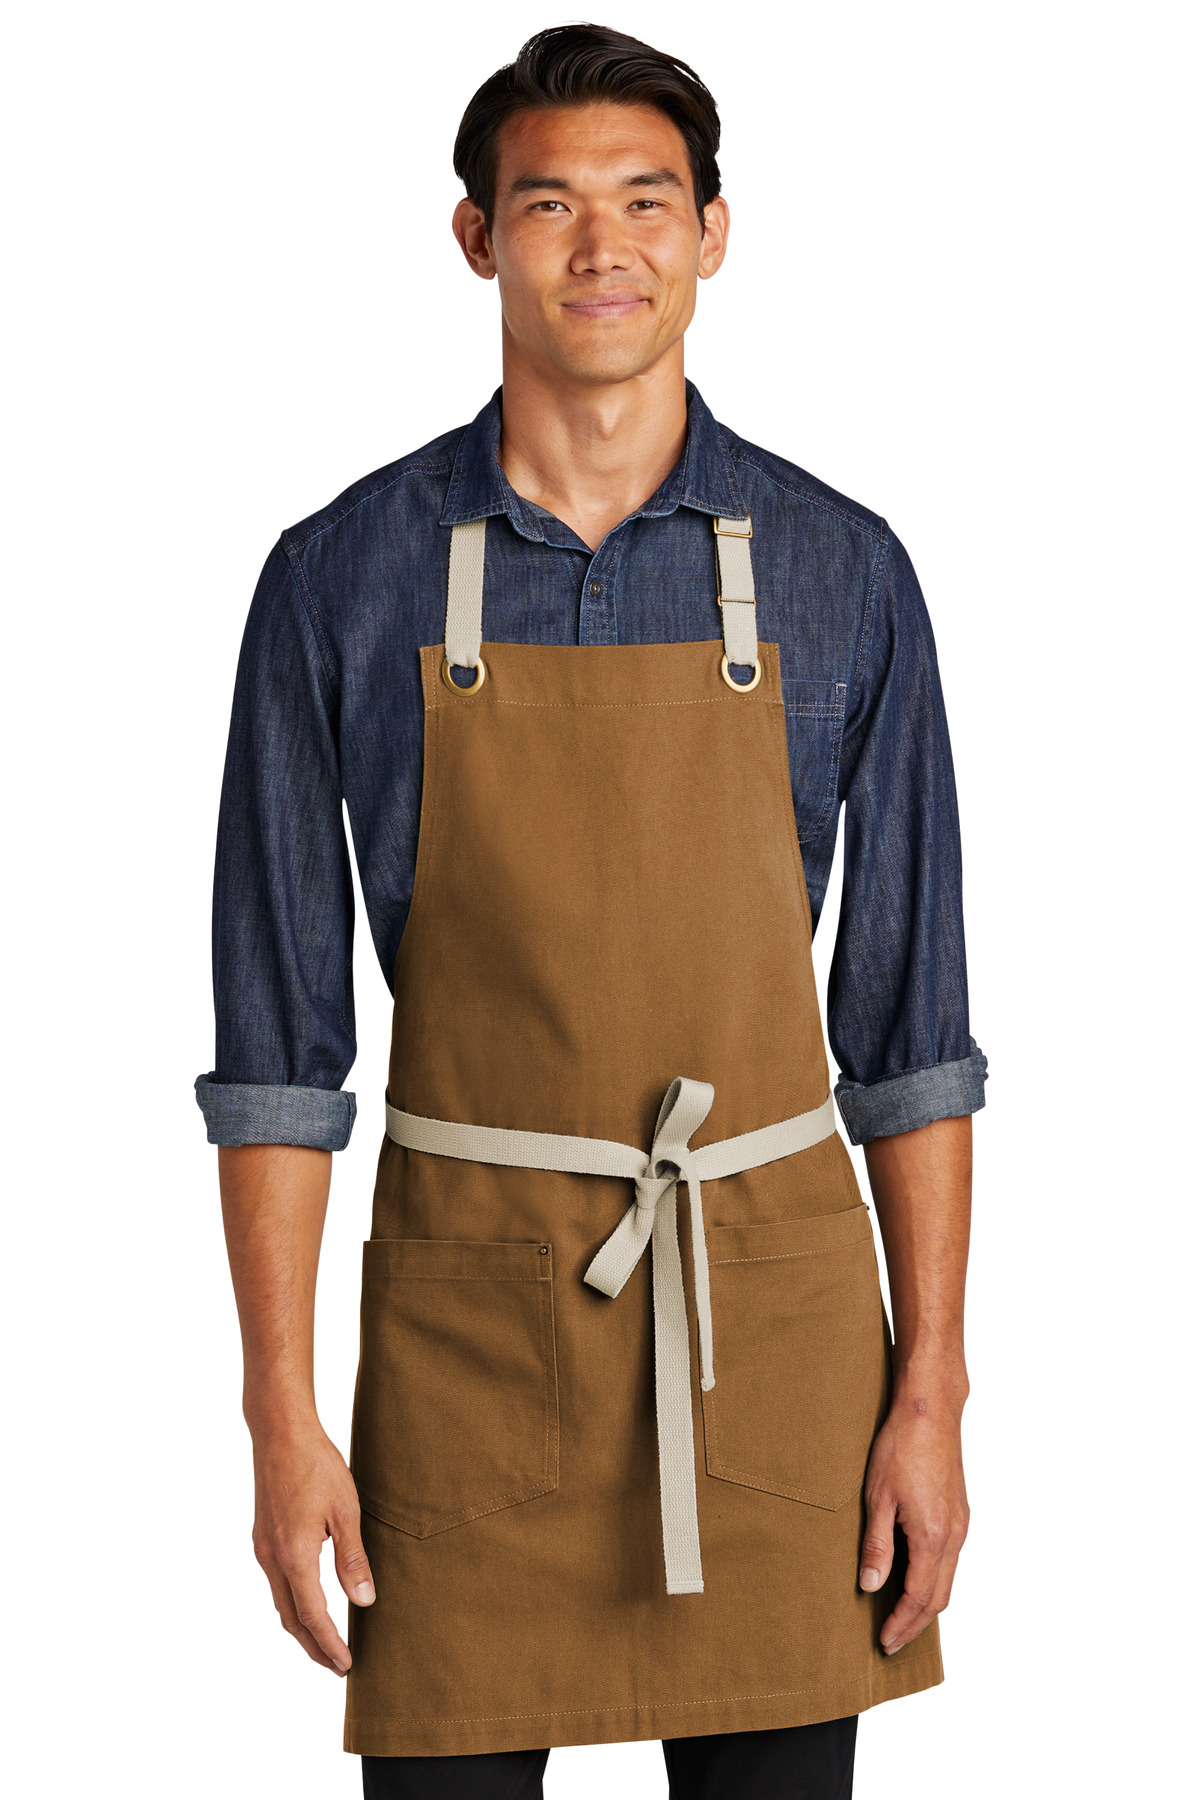 Port Authority Canvas Full-Length Two-Pocket Apron-Port Authority